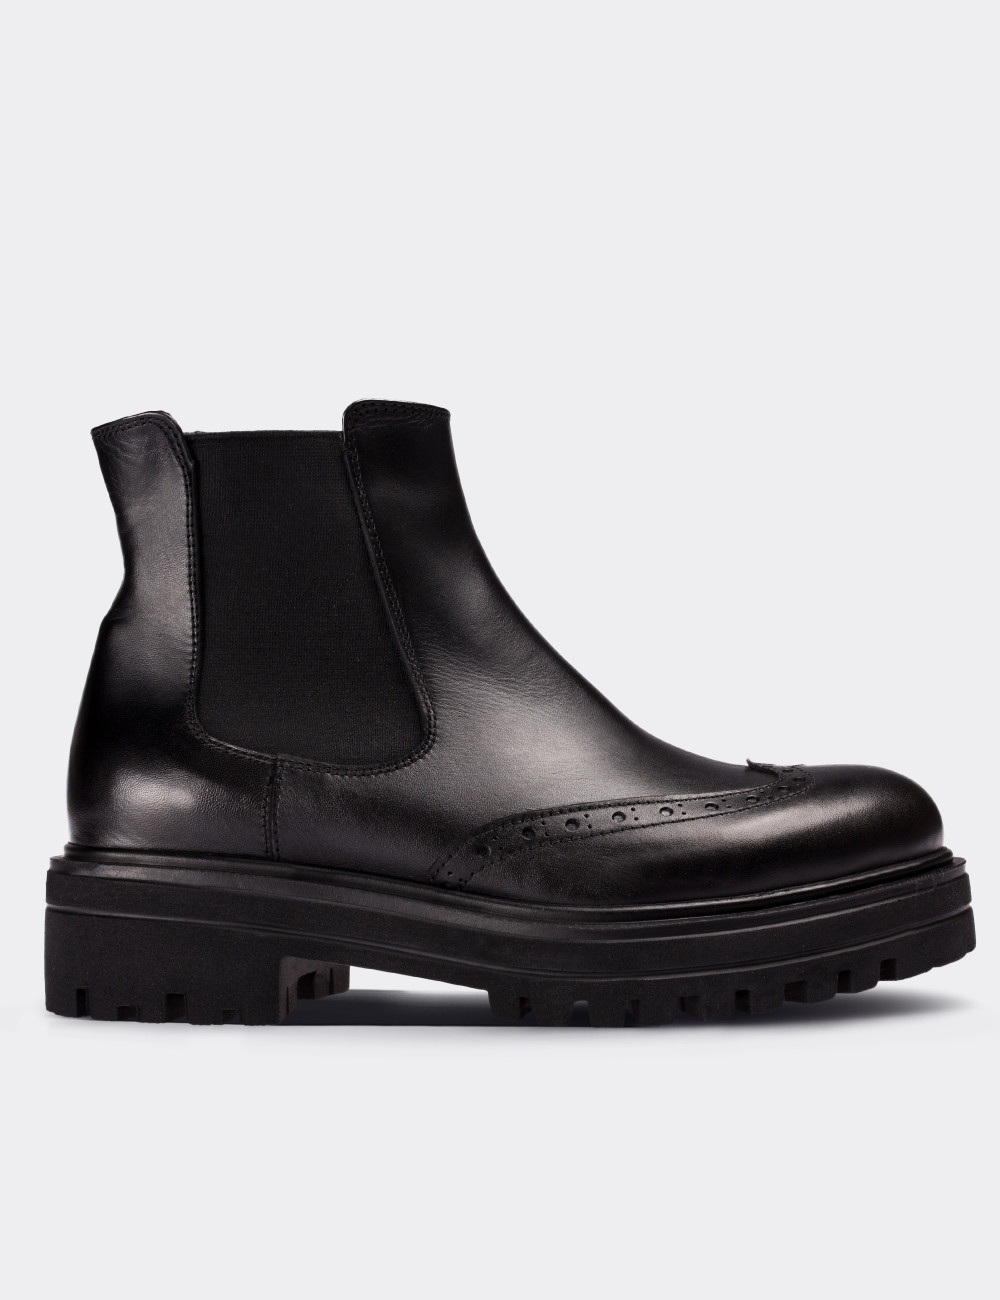 Black  Leather Chelsea Boots - 01800ZSYHE02